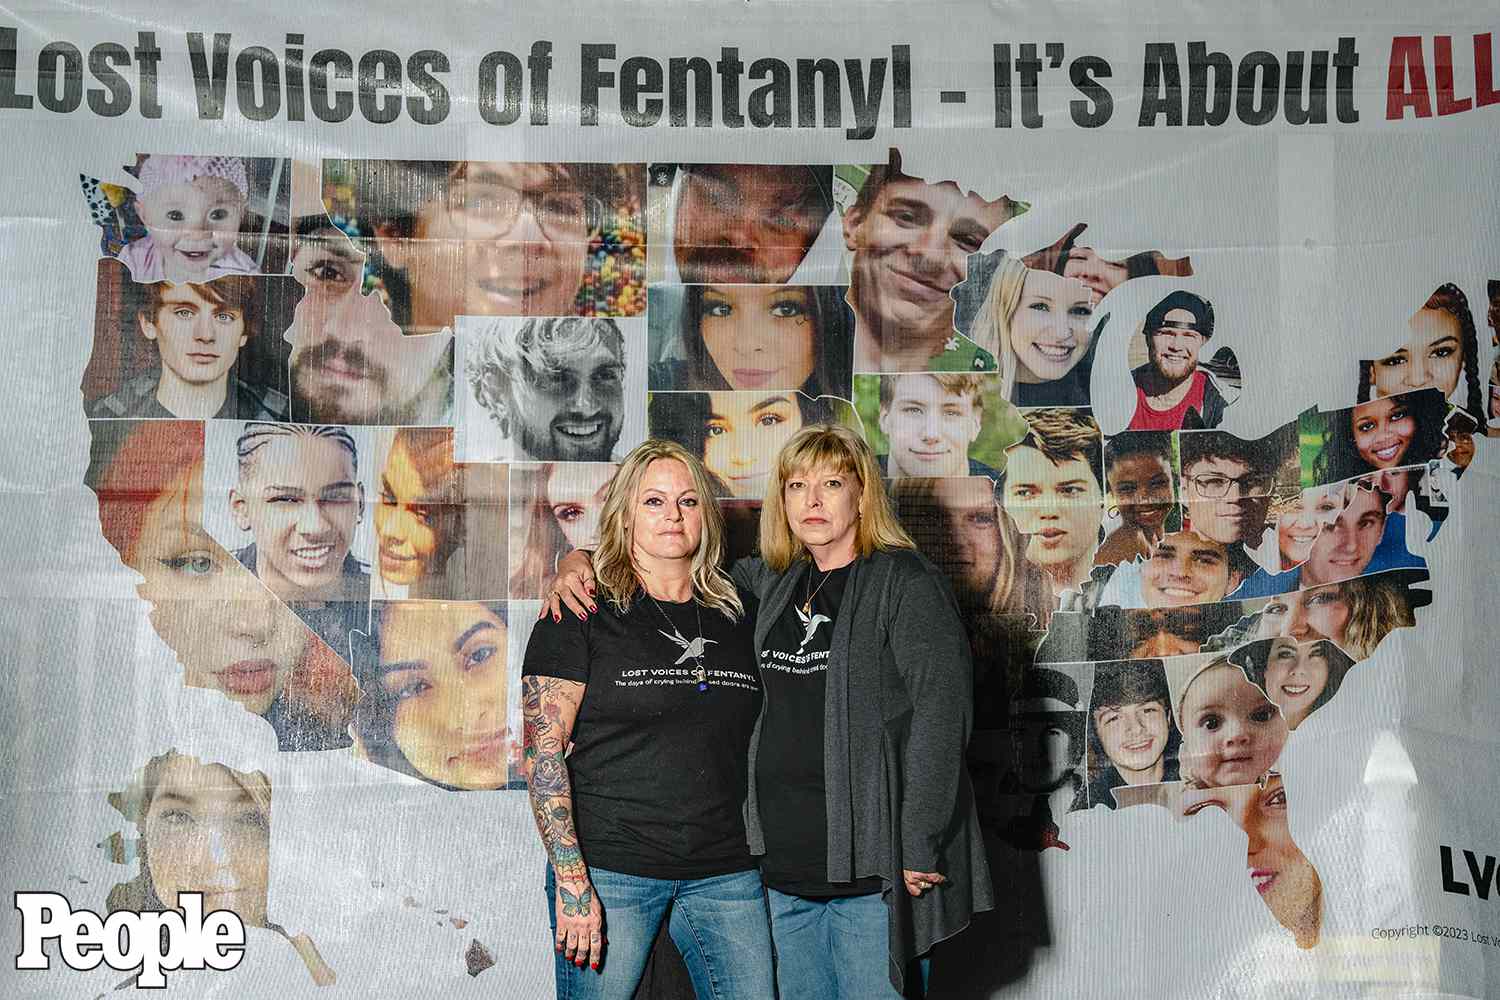 April Babcock (left) and Virginia Krieger both lost a child to Fentanyl. Together they became activist with Lost Voices of Fentanyl. Dundalk MD February 22, 2024